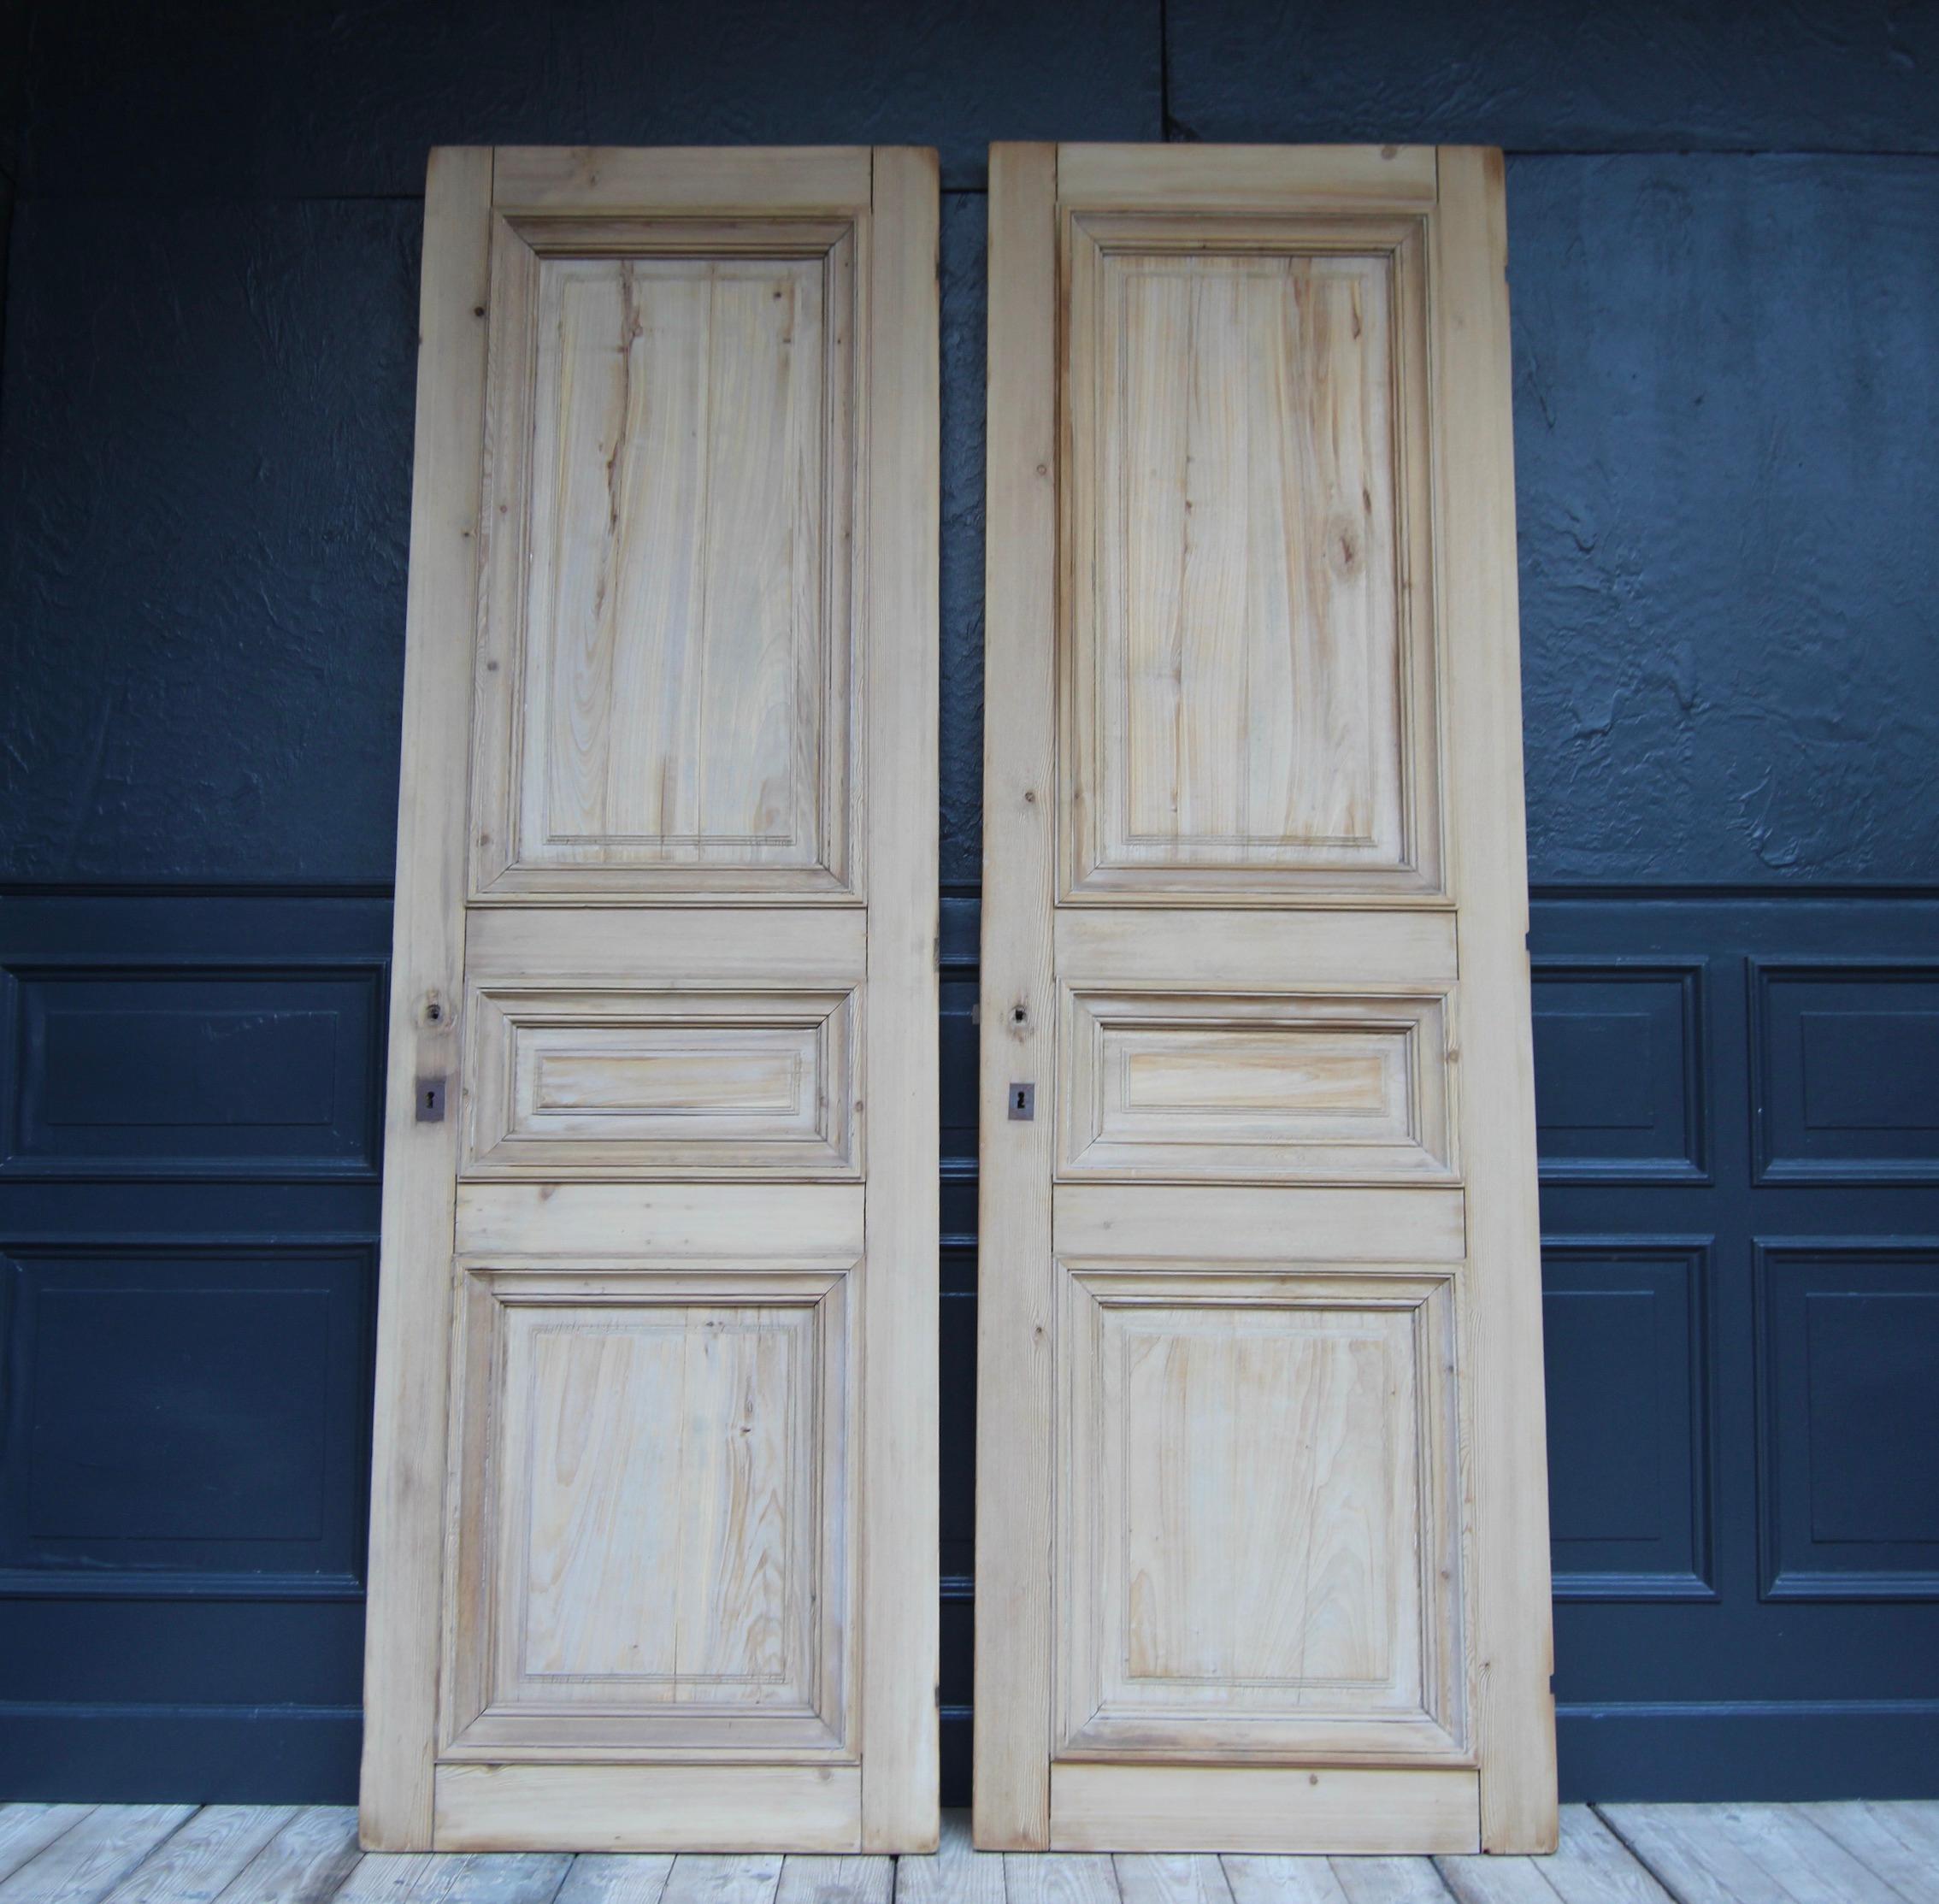 A pair of French doors from around 1900, solid pine frame construction with 3 panels each.

Dimensions: 238 cm high, 75.5 cm wide, 4.5 cm deep

Also very suitable for installation as sliding doors.

The doors have been stripped of their old colour